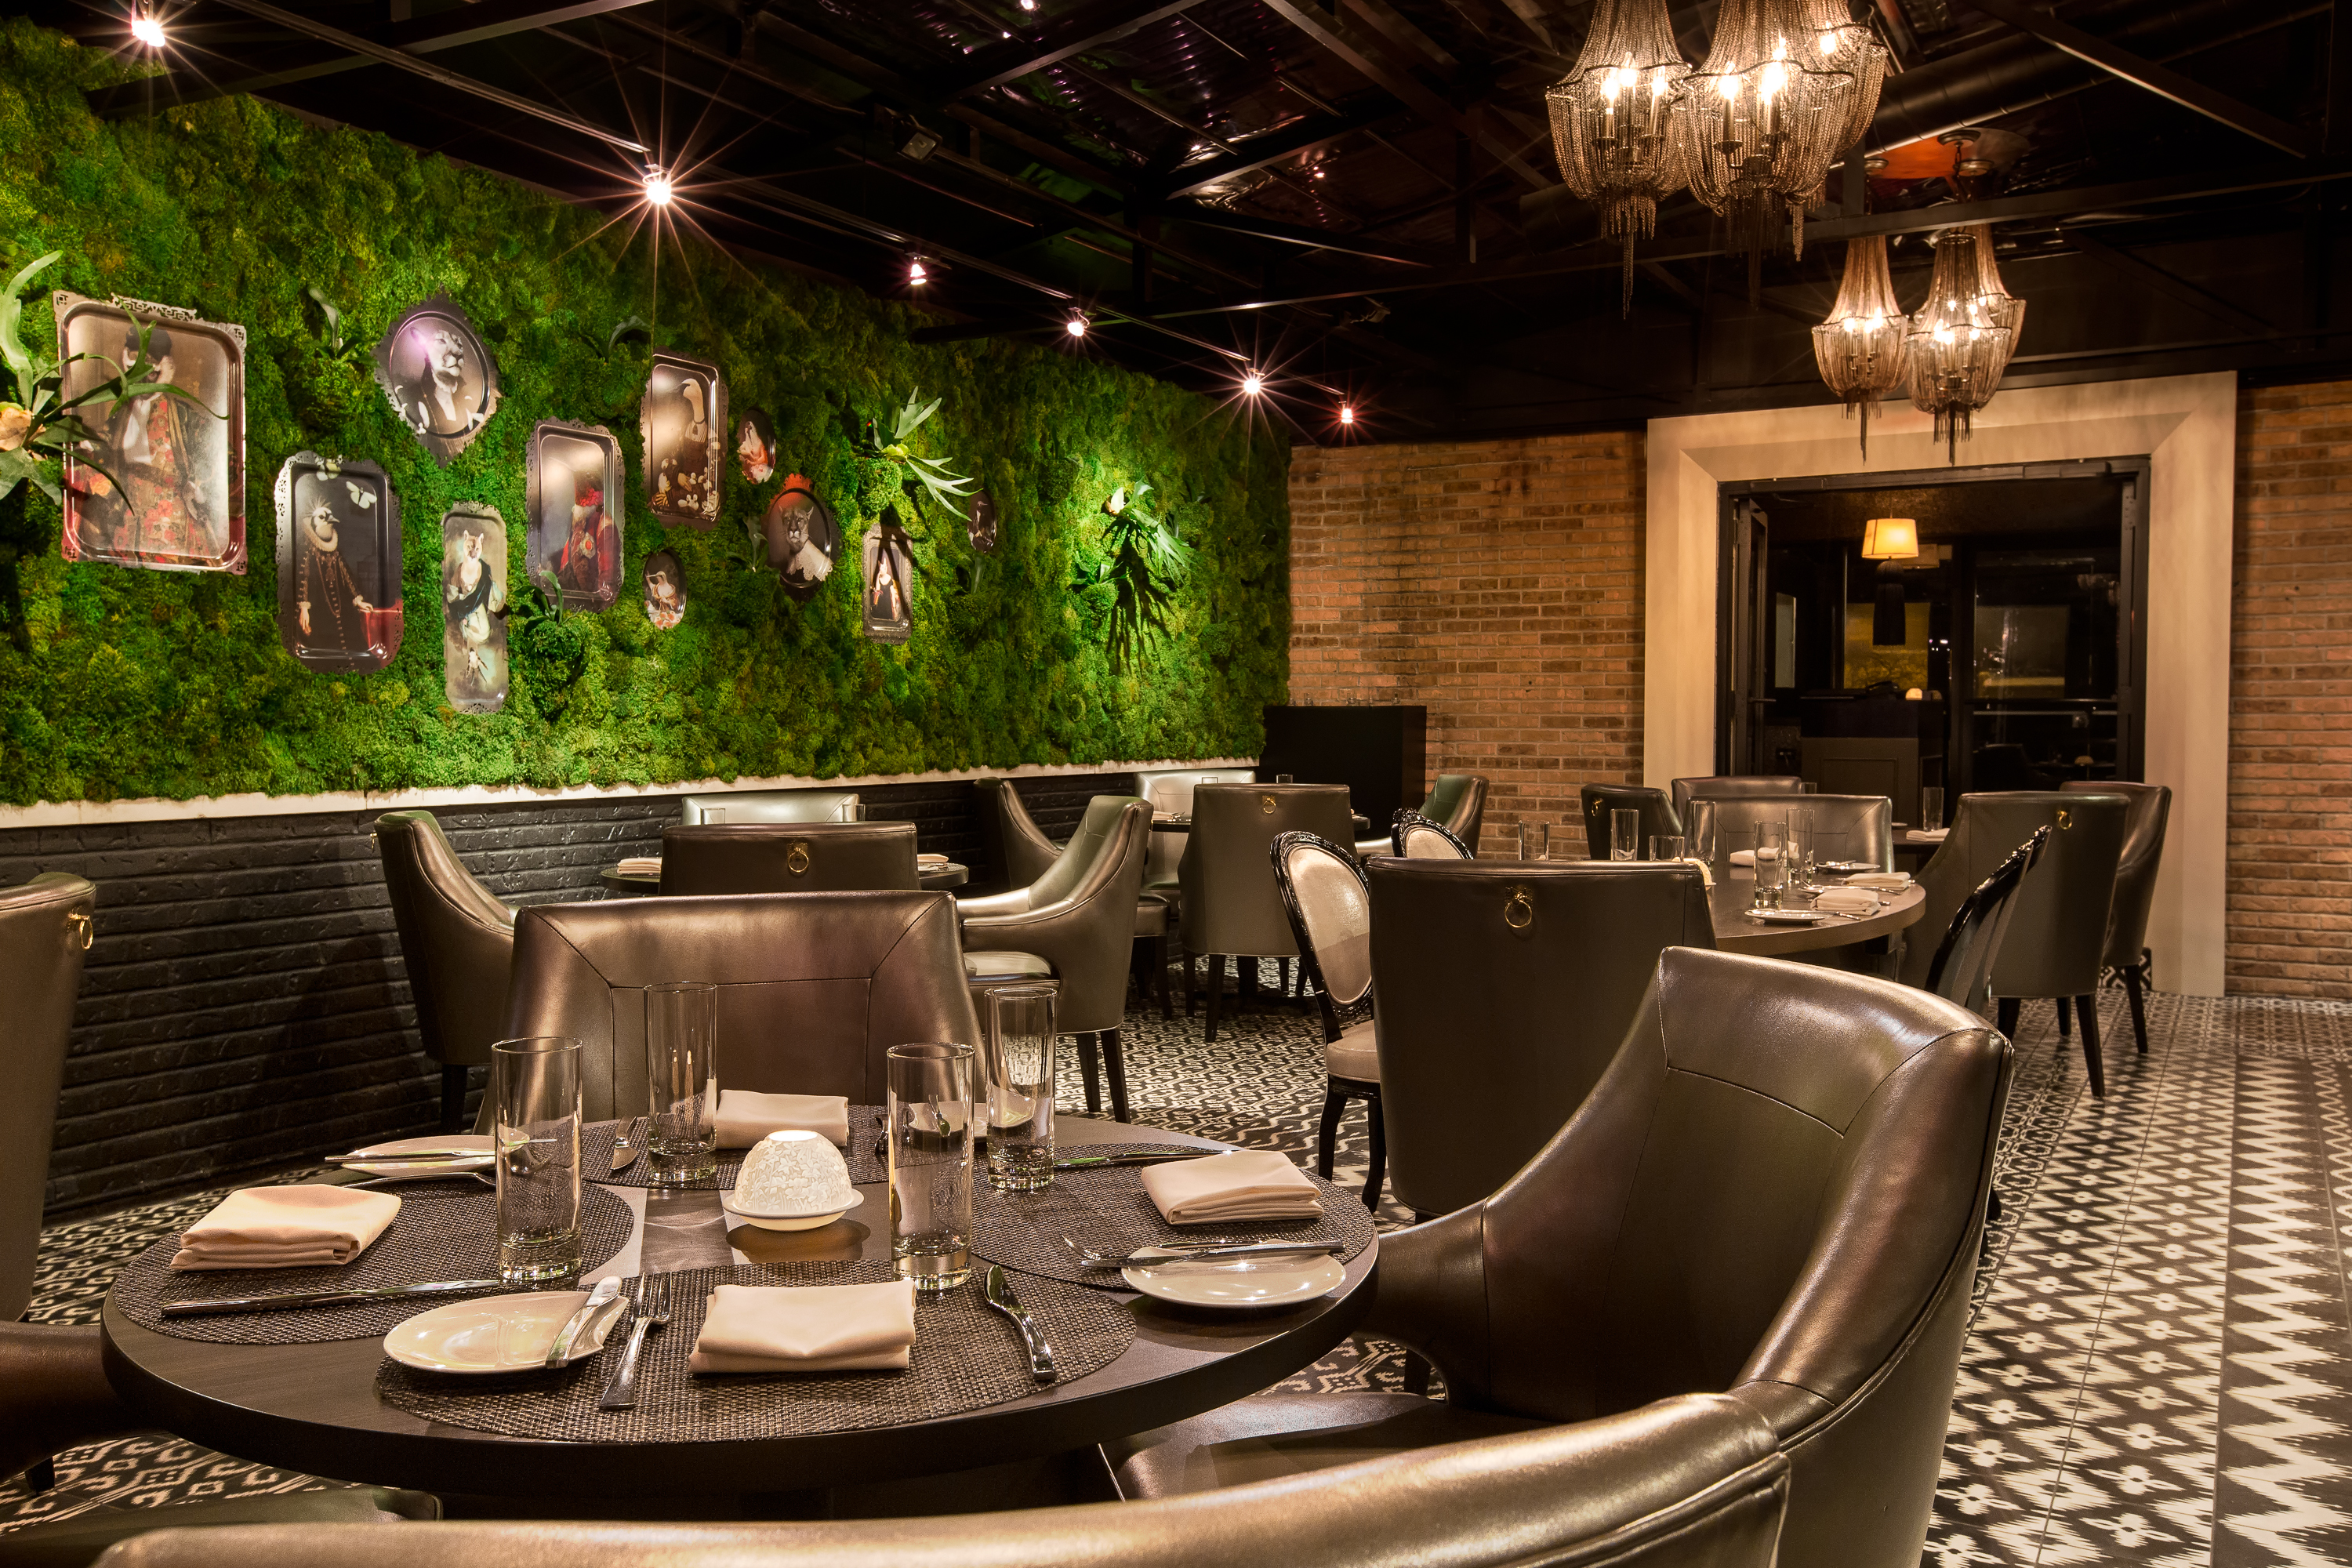 chicago restaurants with private dining rooms